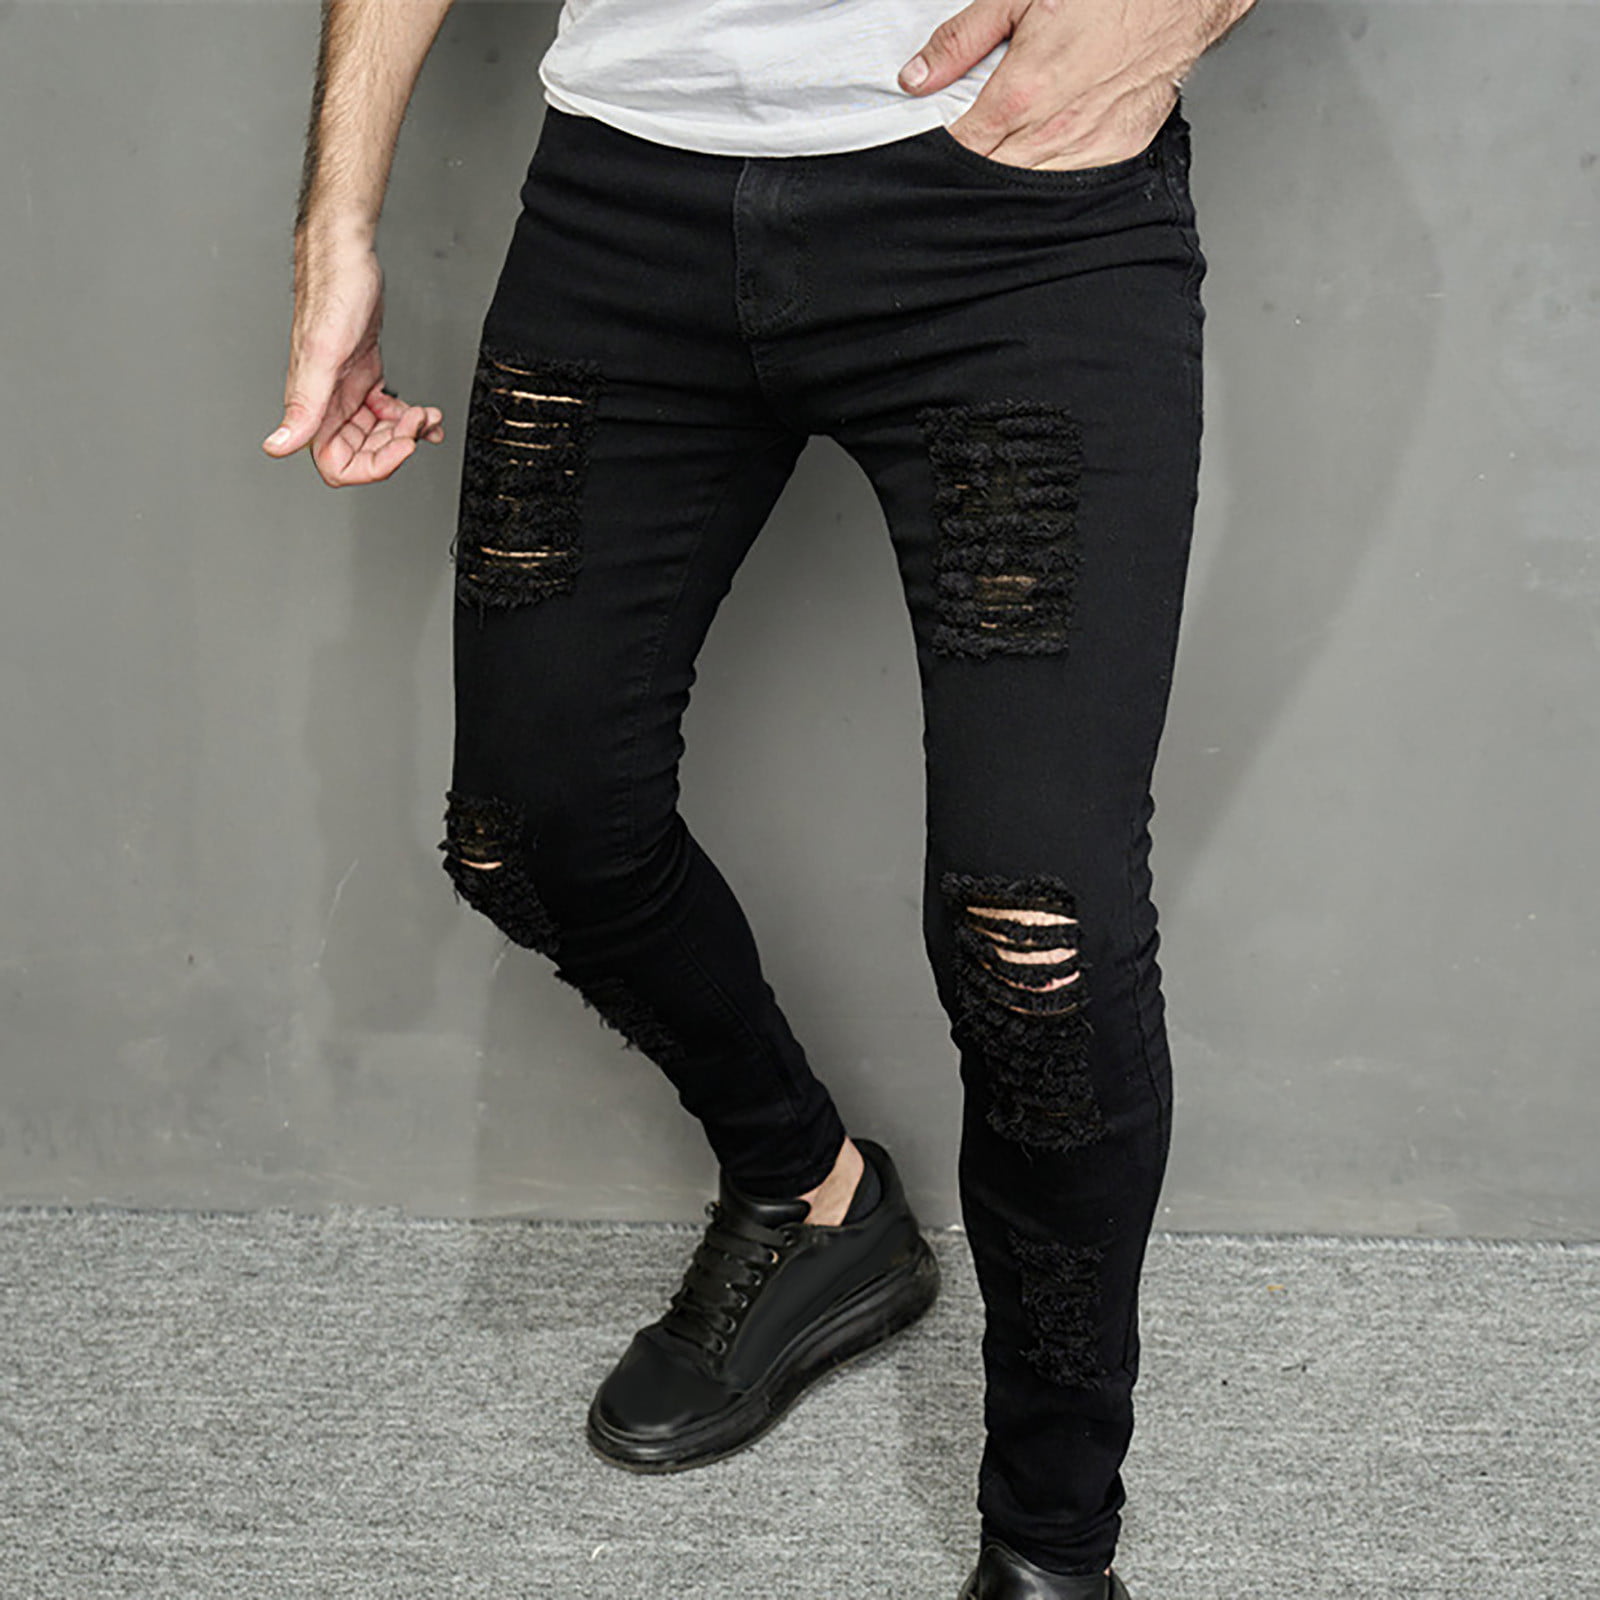 Retro Black Black Ripped Jeans Mens With Stretch Holes, Ripped Design, And  Slim Fit High Quality Fashion Casual Denim Trousers From Cinda01, $22.17 |  DHgate.Com